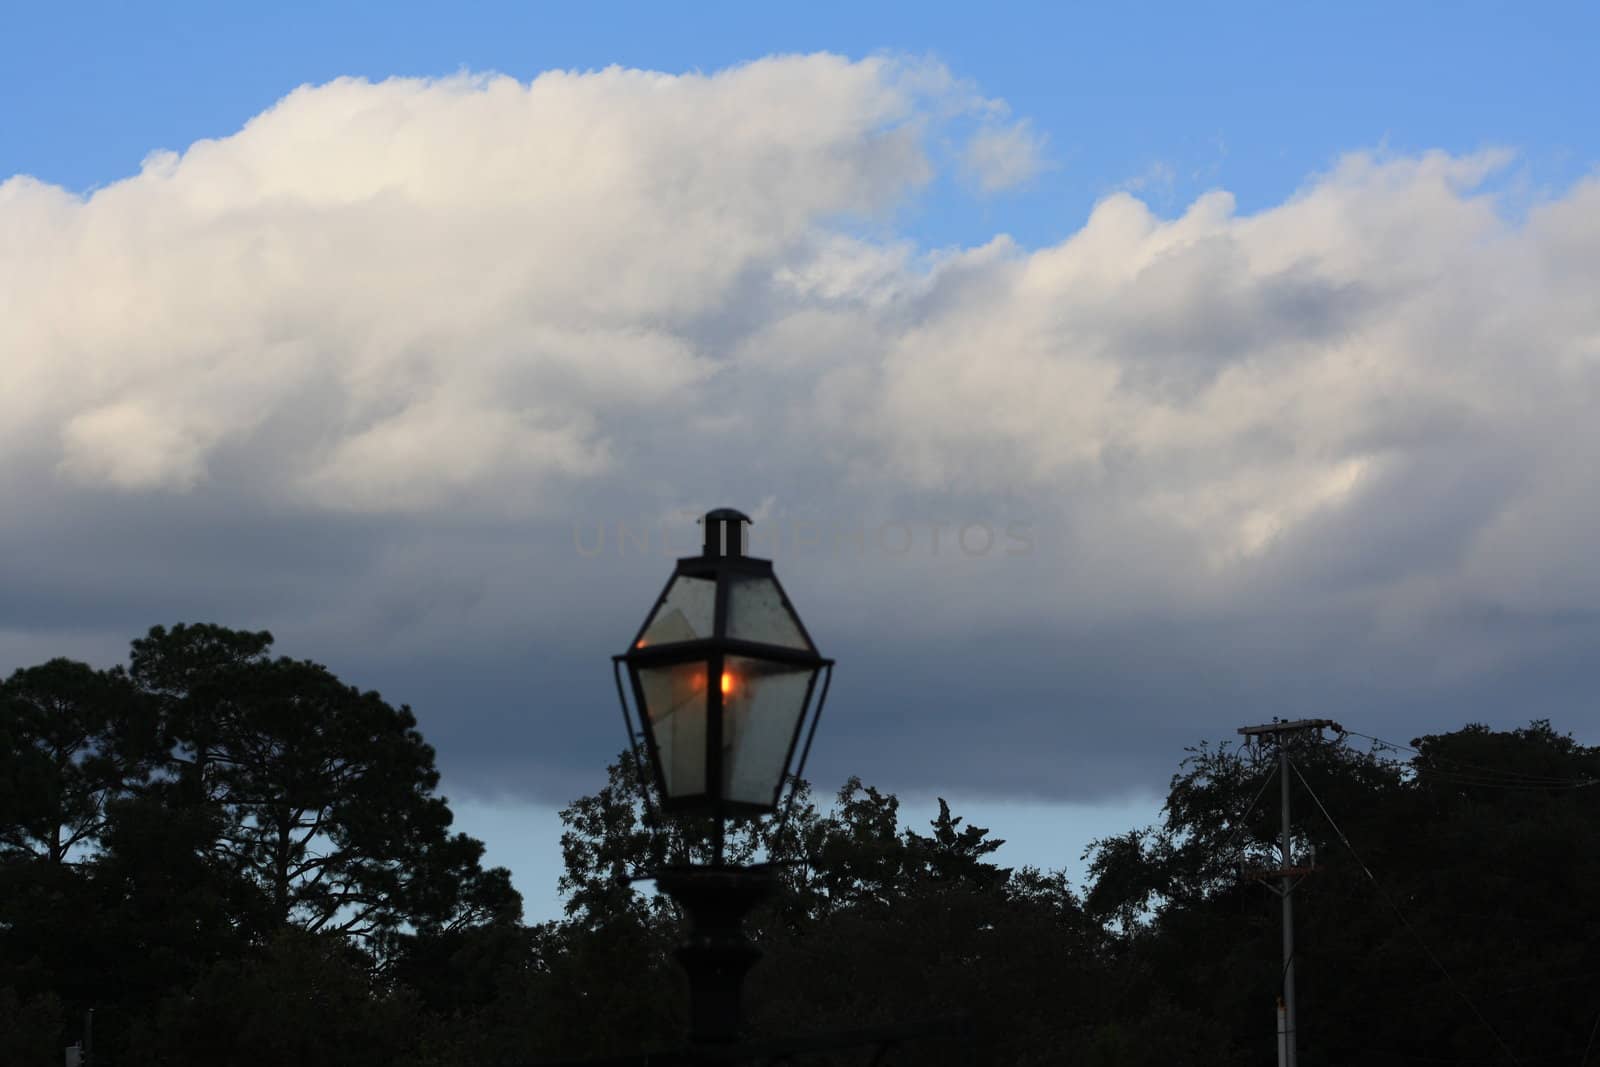 Street lamp with cloudy sky and trees in the background